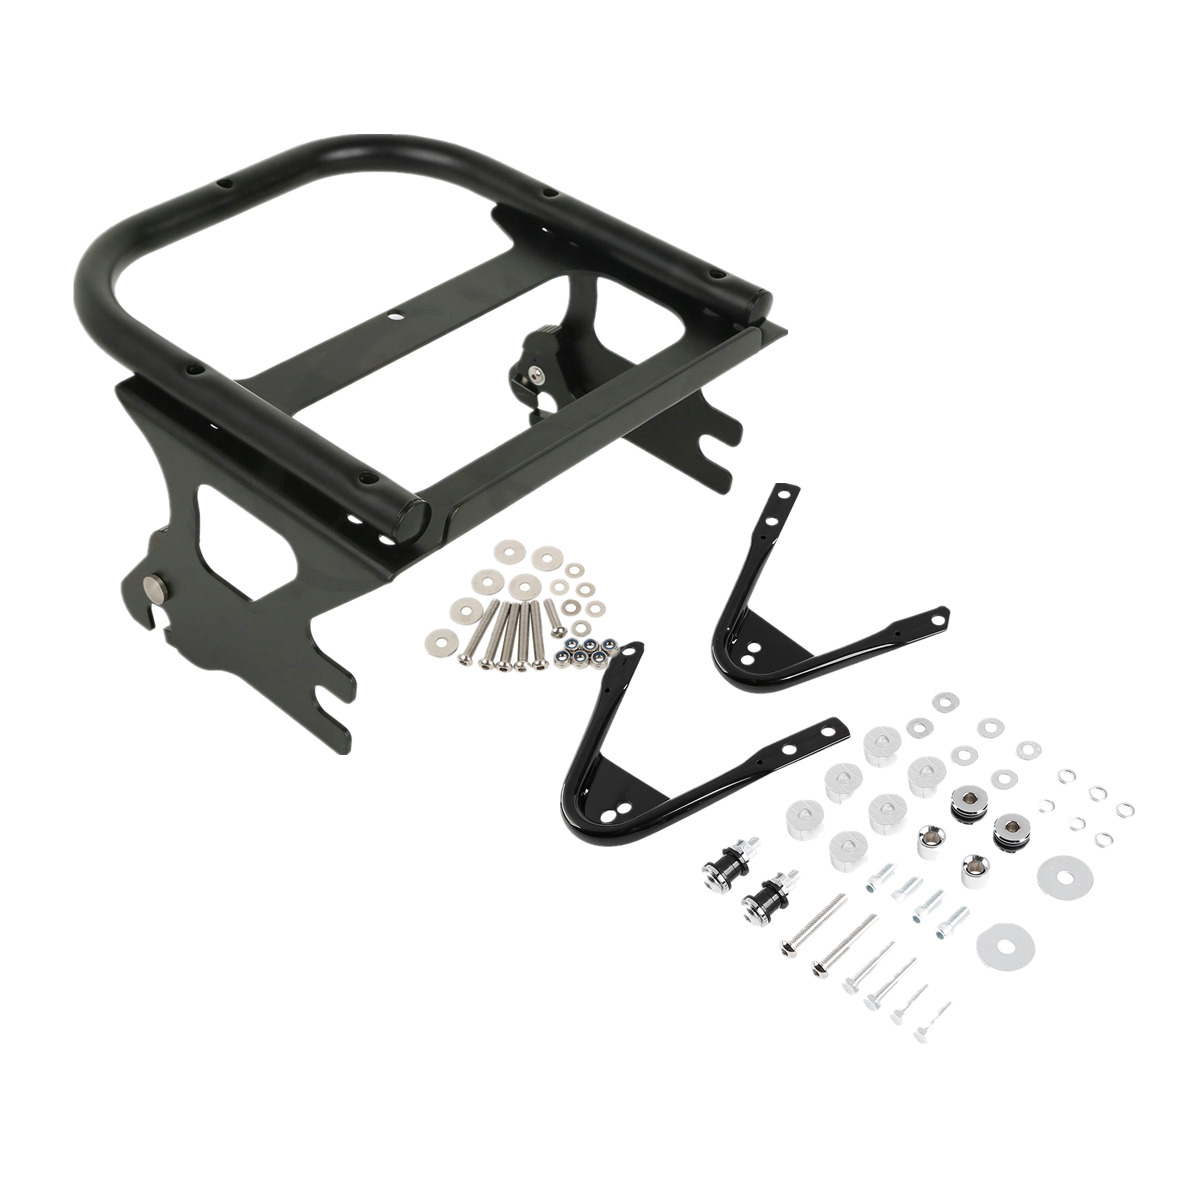 Two-Up Trunk Pack Luggage Rack&Docking Kits Fit For Harley Road King Glide 97-08